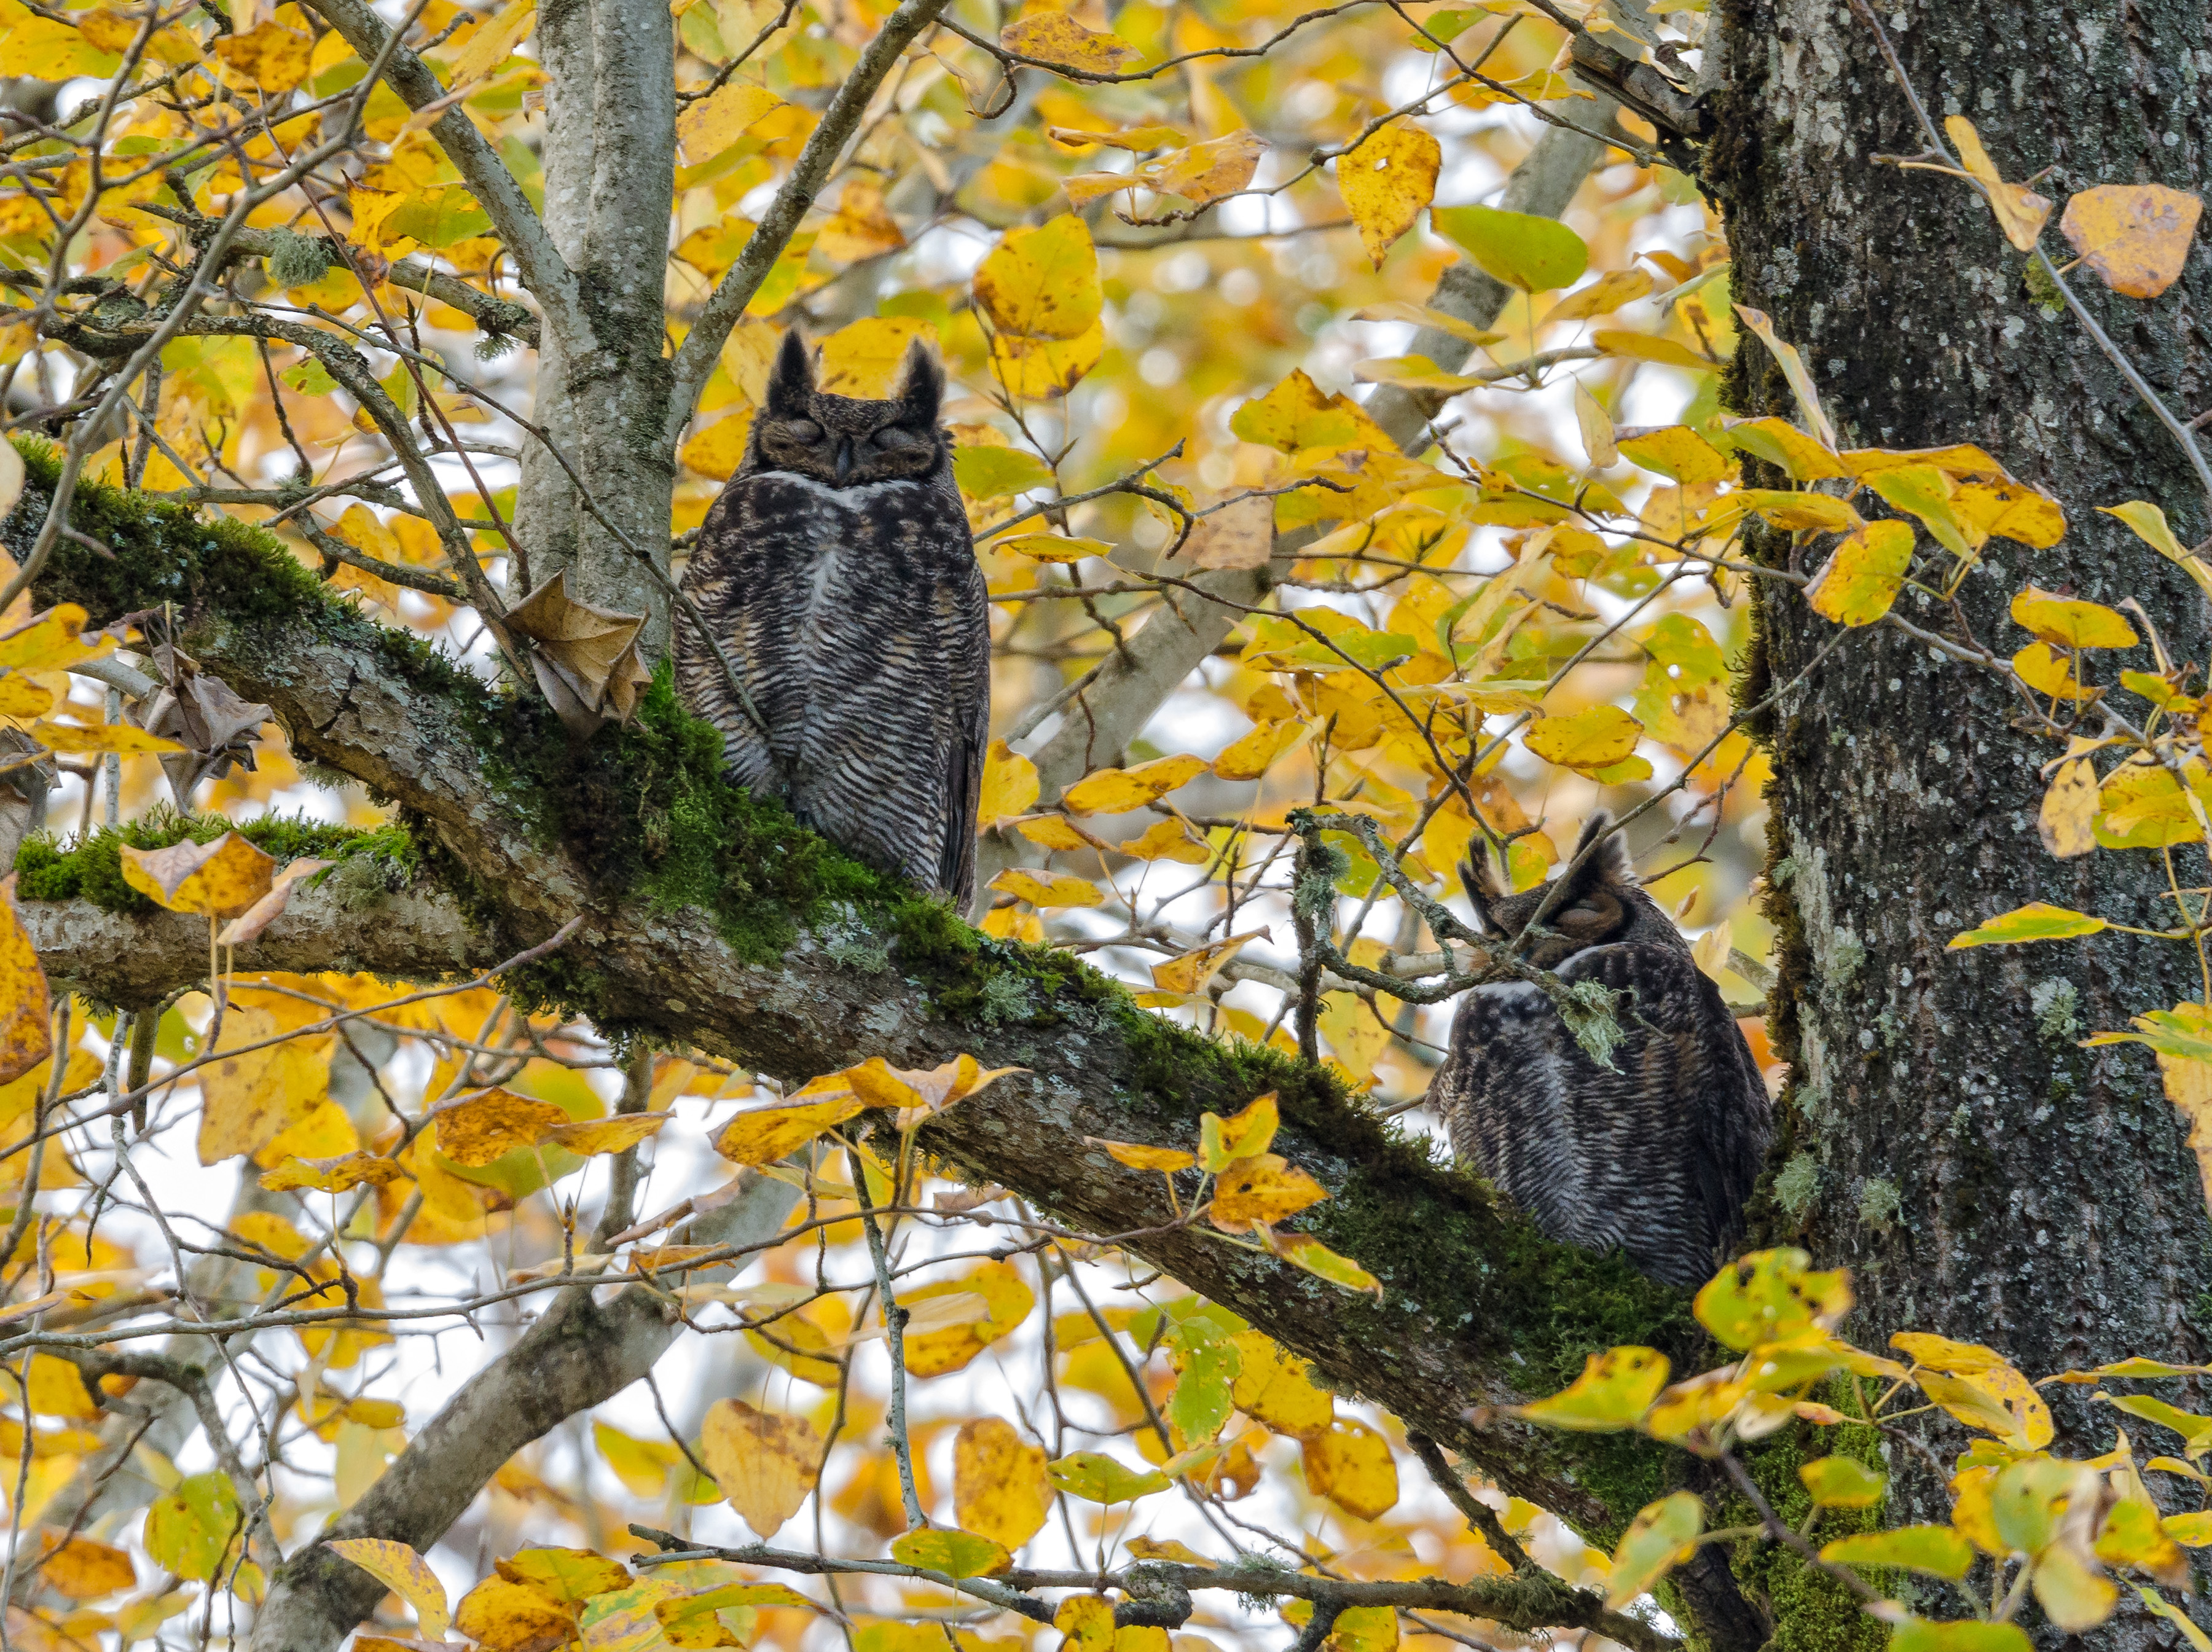 Two great horned owls perched in a tree with yellow, fall leaves